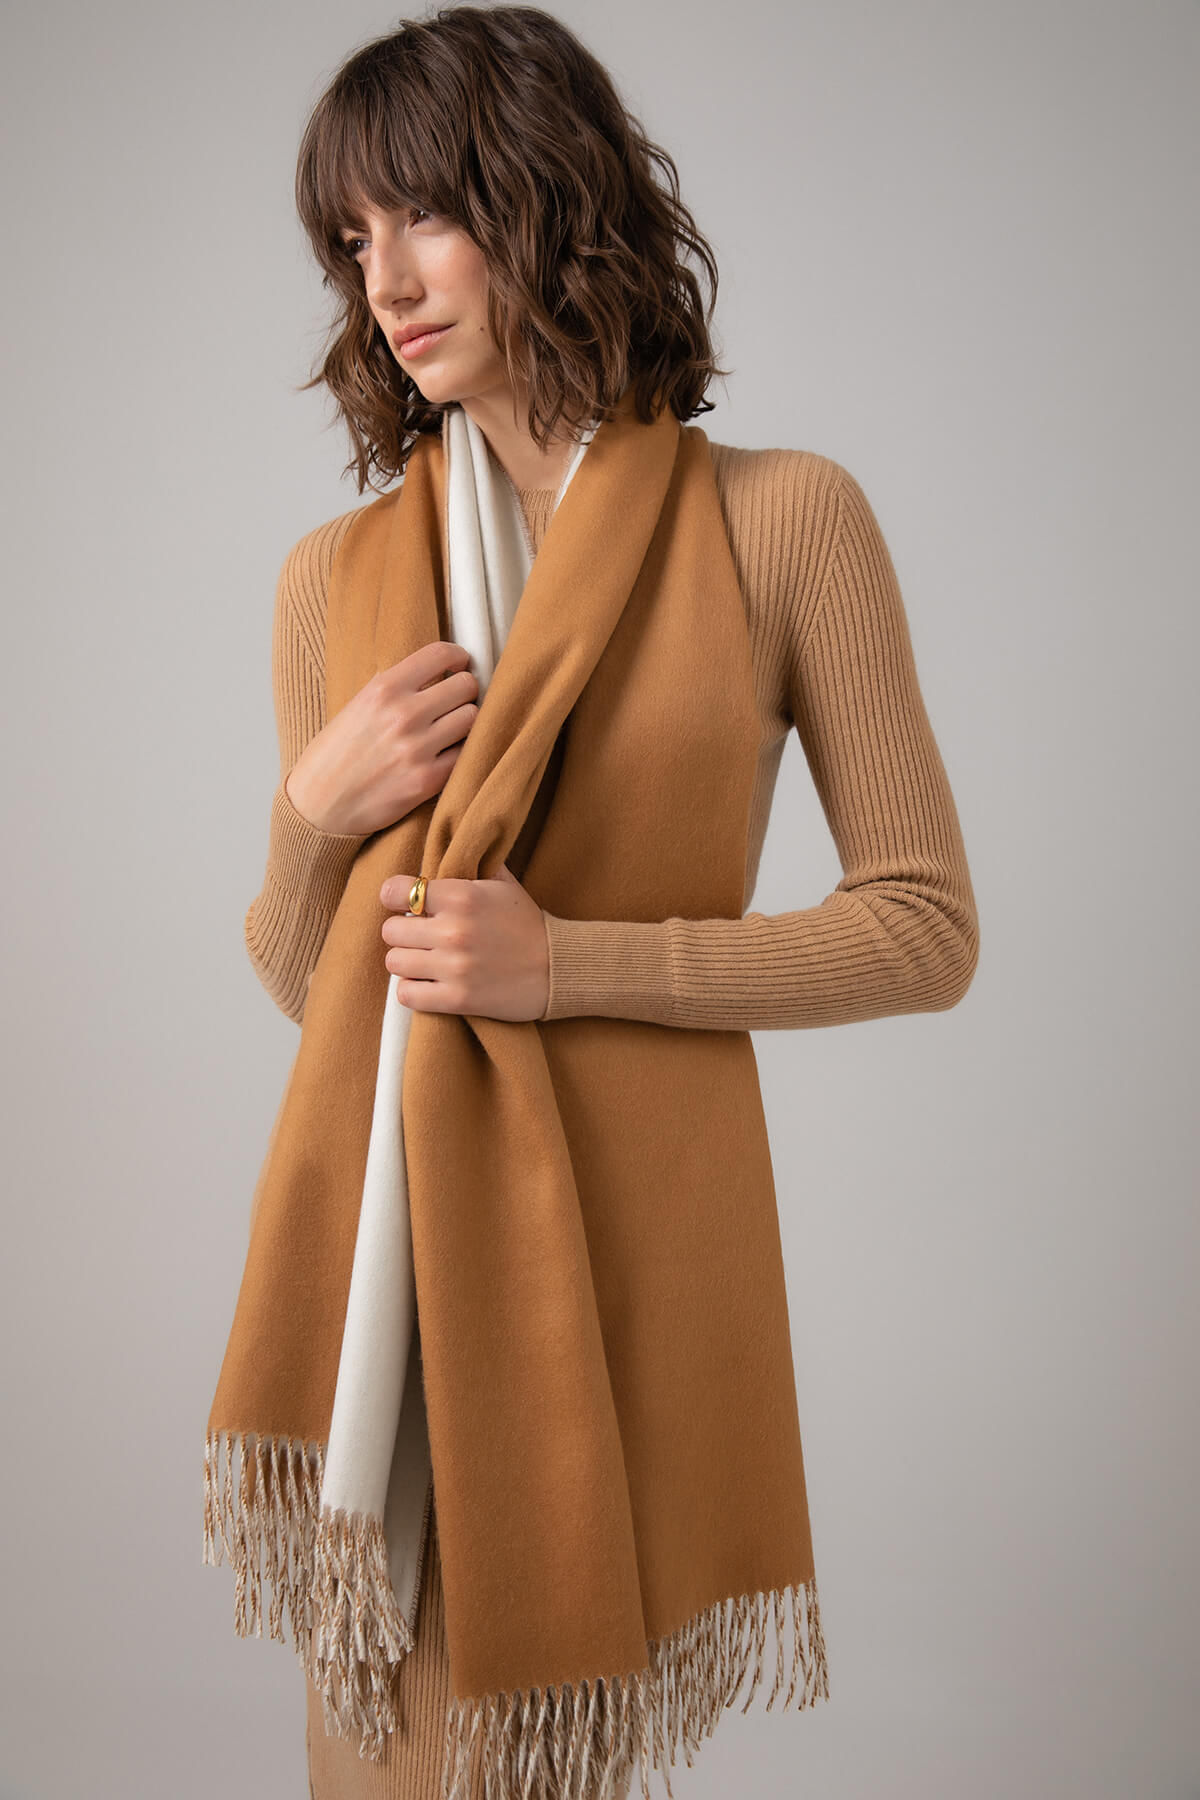 Model wearing a Johnstons of Elgin Reversible Cashmere Stole in Dark Camel over a Camel Cashmere Sweater on a grey background WA000585RU5244ONE